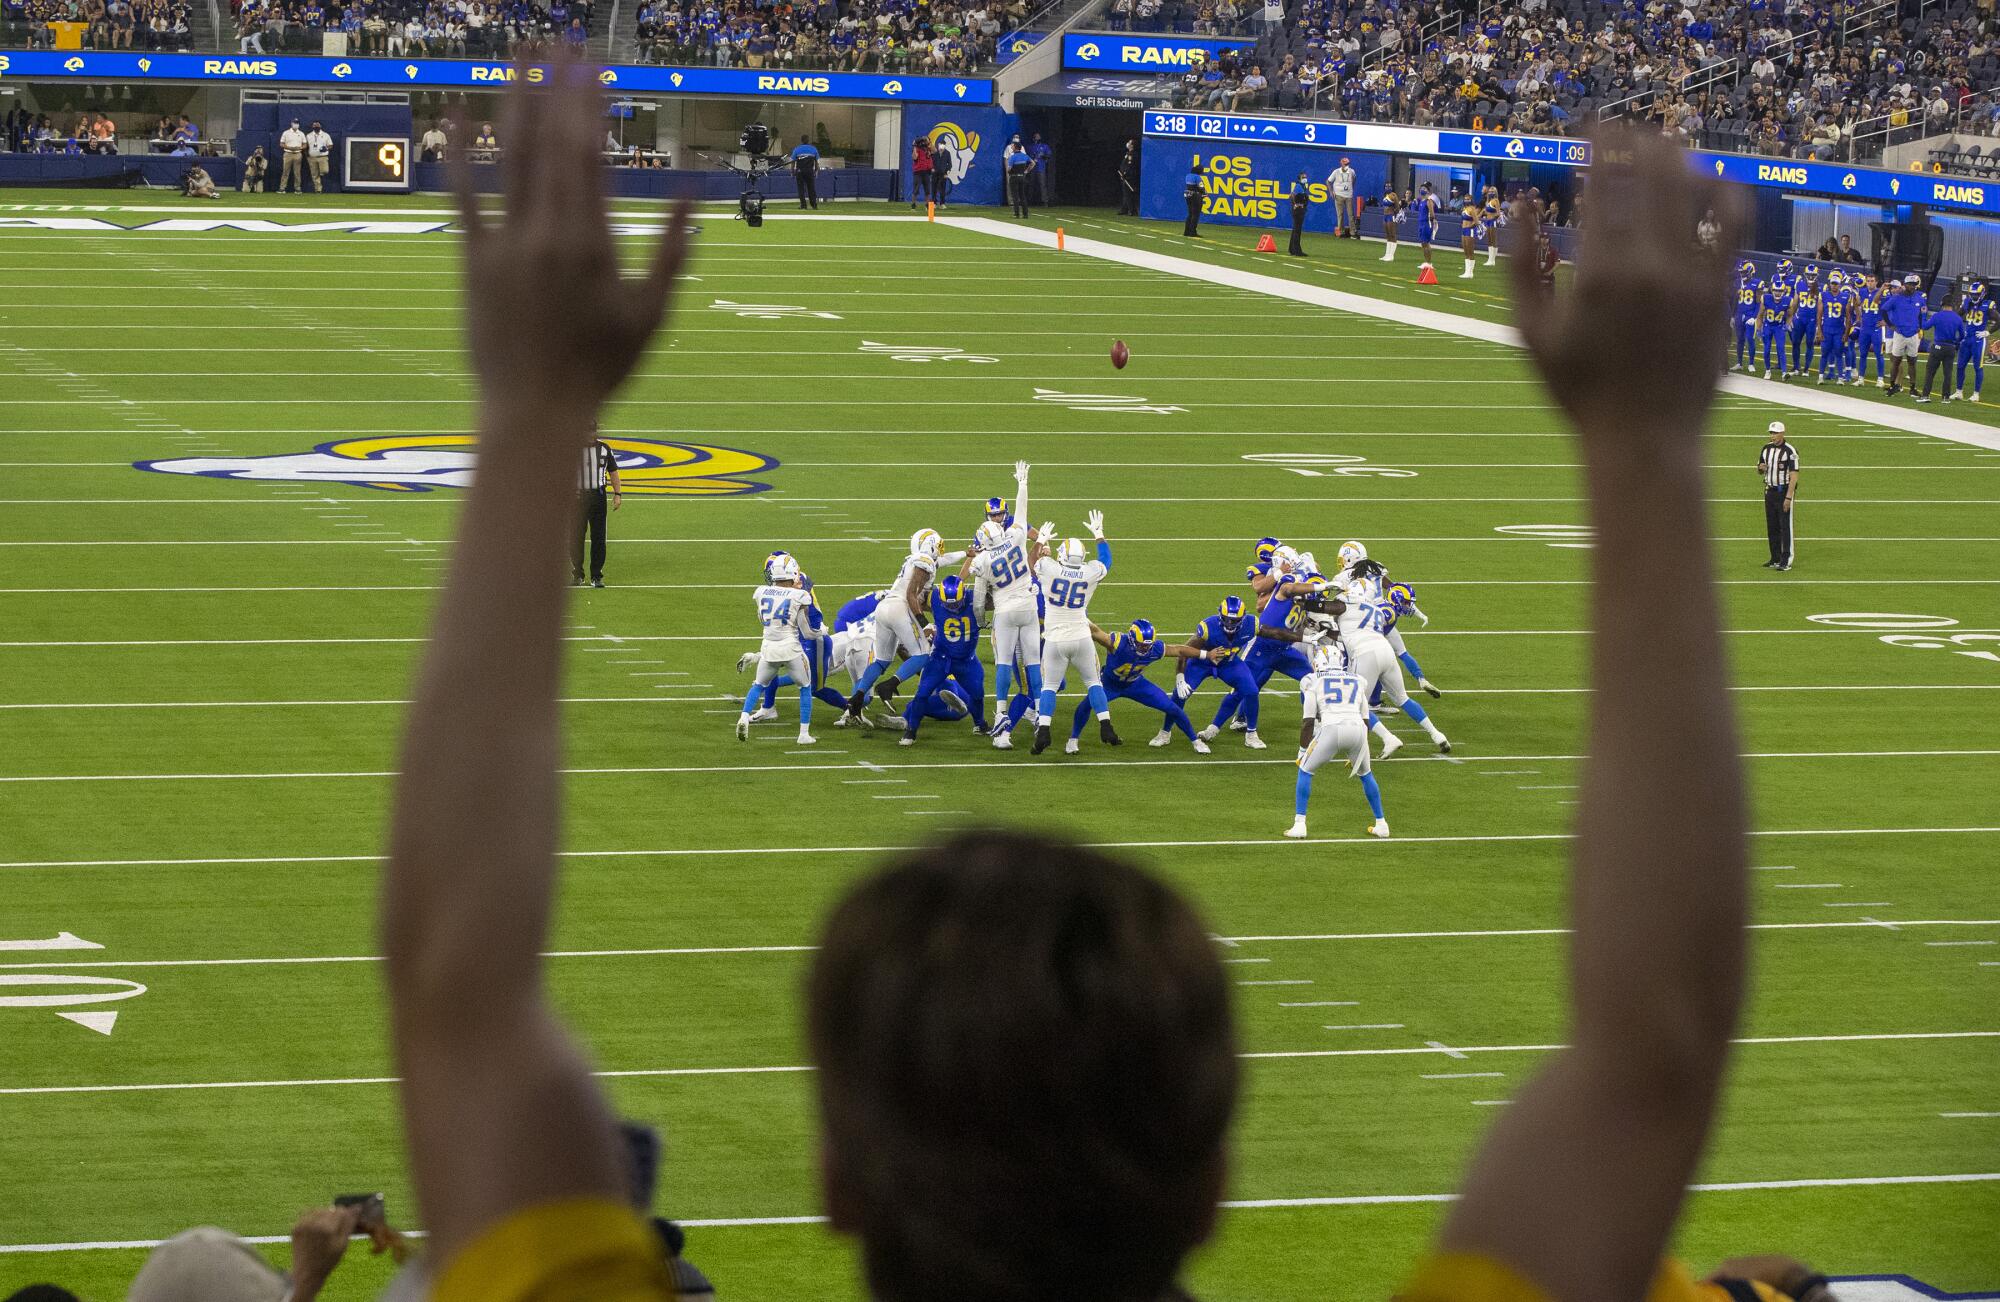 Fans watch at SoFi Stadium as the Rams attempt an extra point during a preseason game against the Chargers.